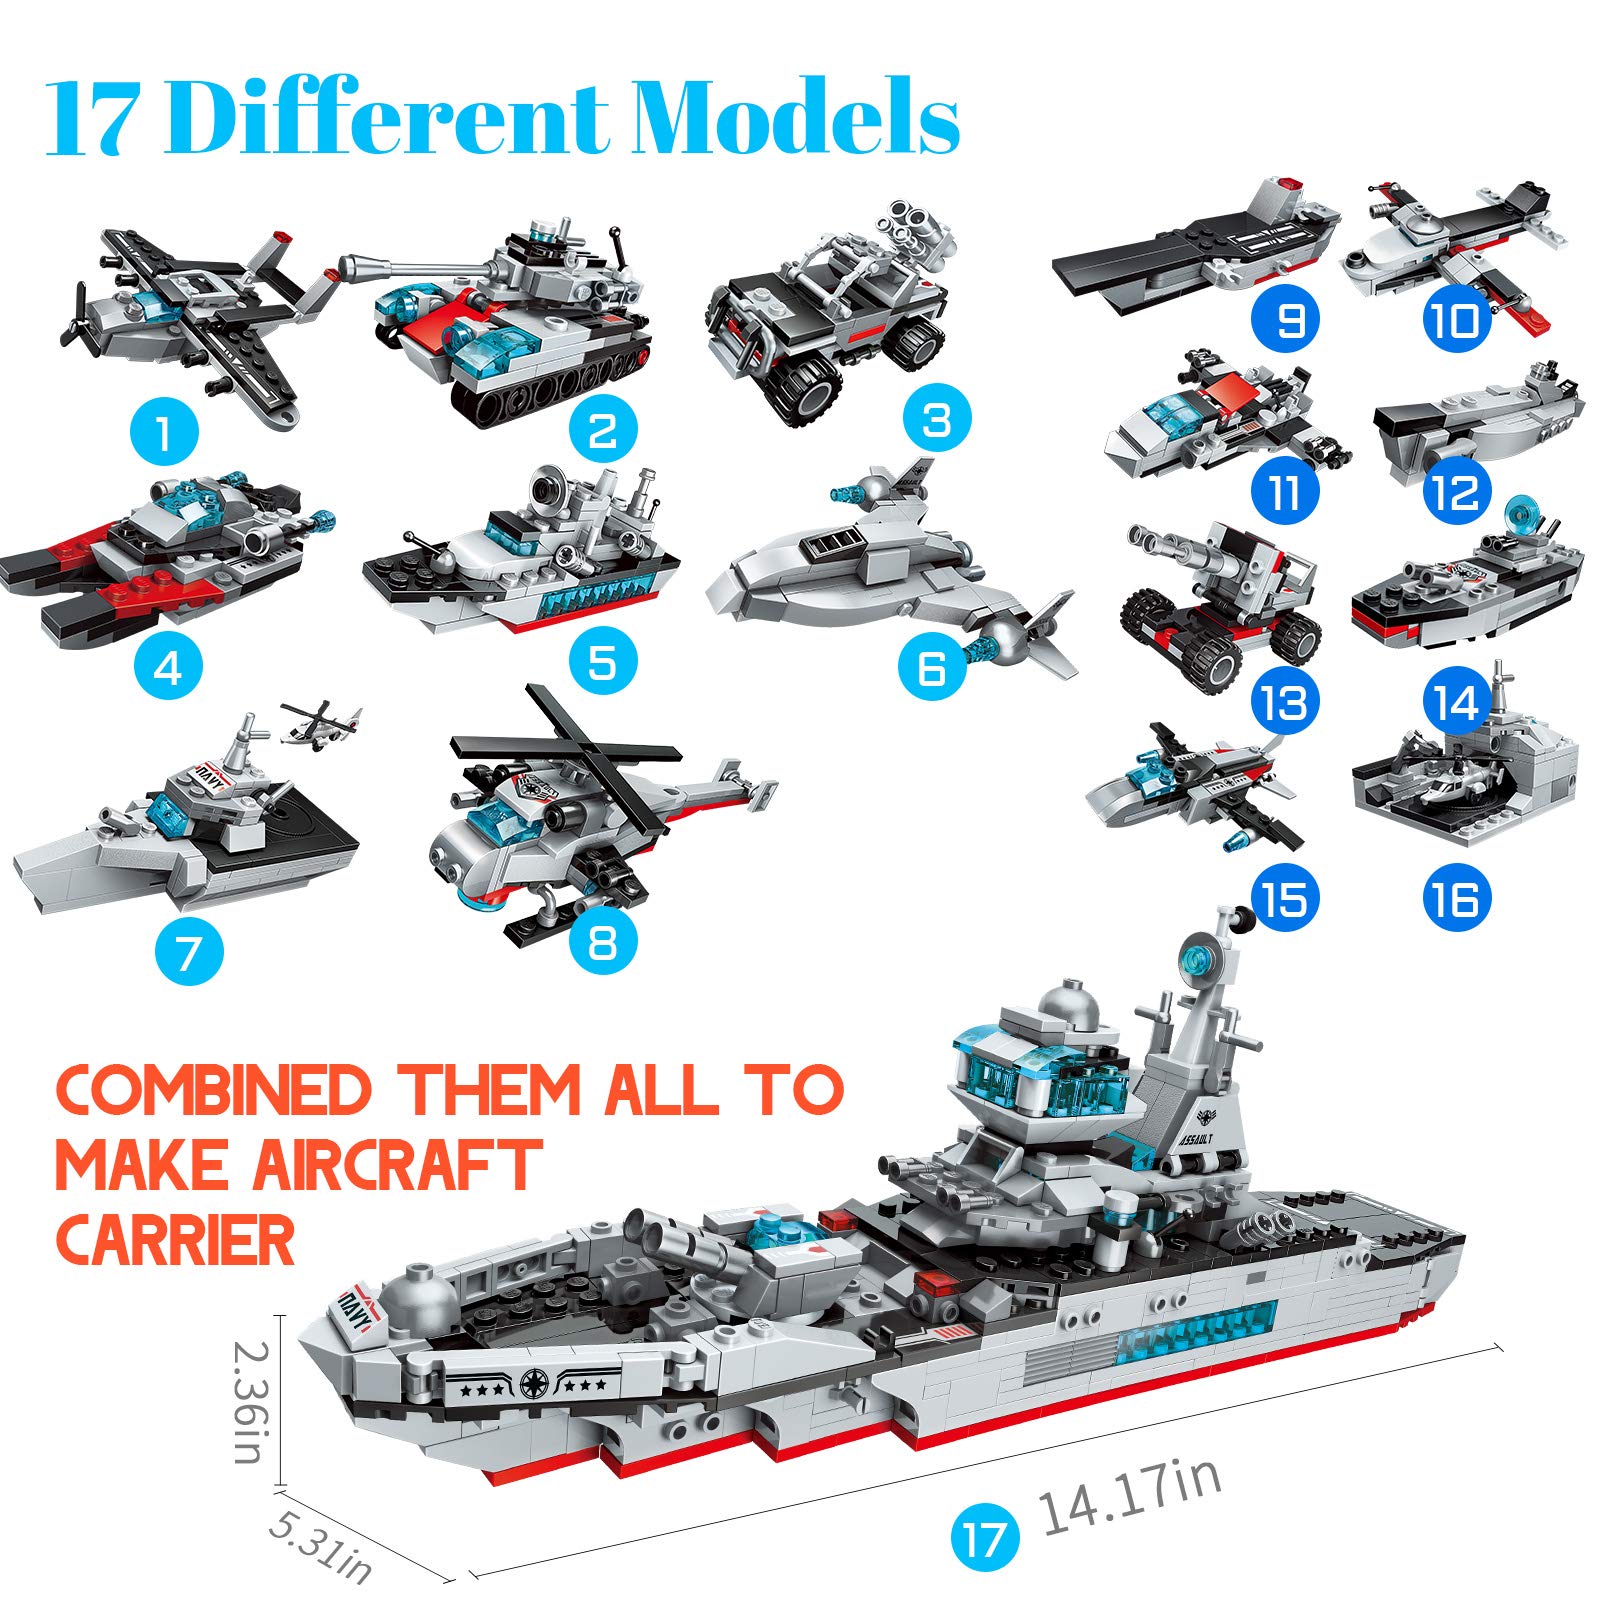 STEM Building Toys for Boys 6 7 8 Old, Gift for Adults and Kids Birthday, 700 PCS 17-in-1 Military Battleship Aircraft Carrier Toys for 9 10 11 12 Old Year Boys, Educational Toys for 6-10 Boys